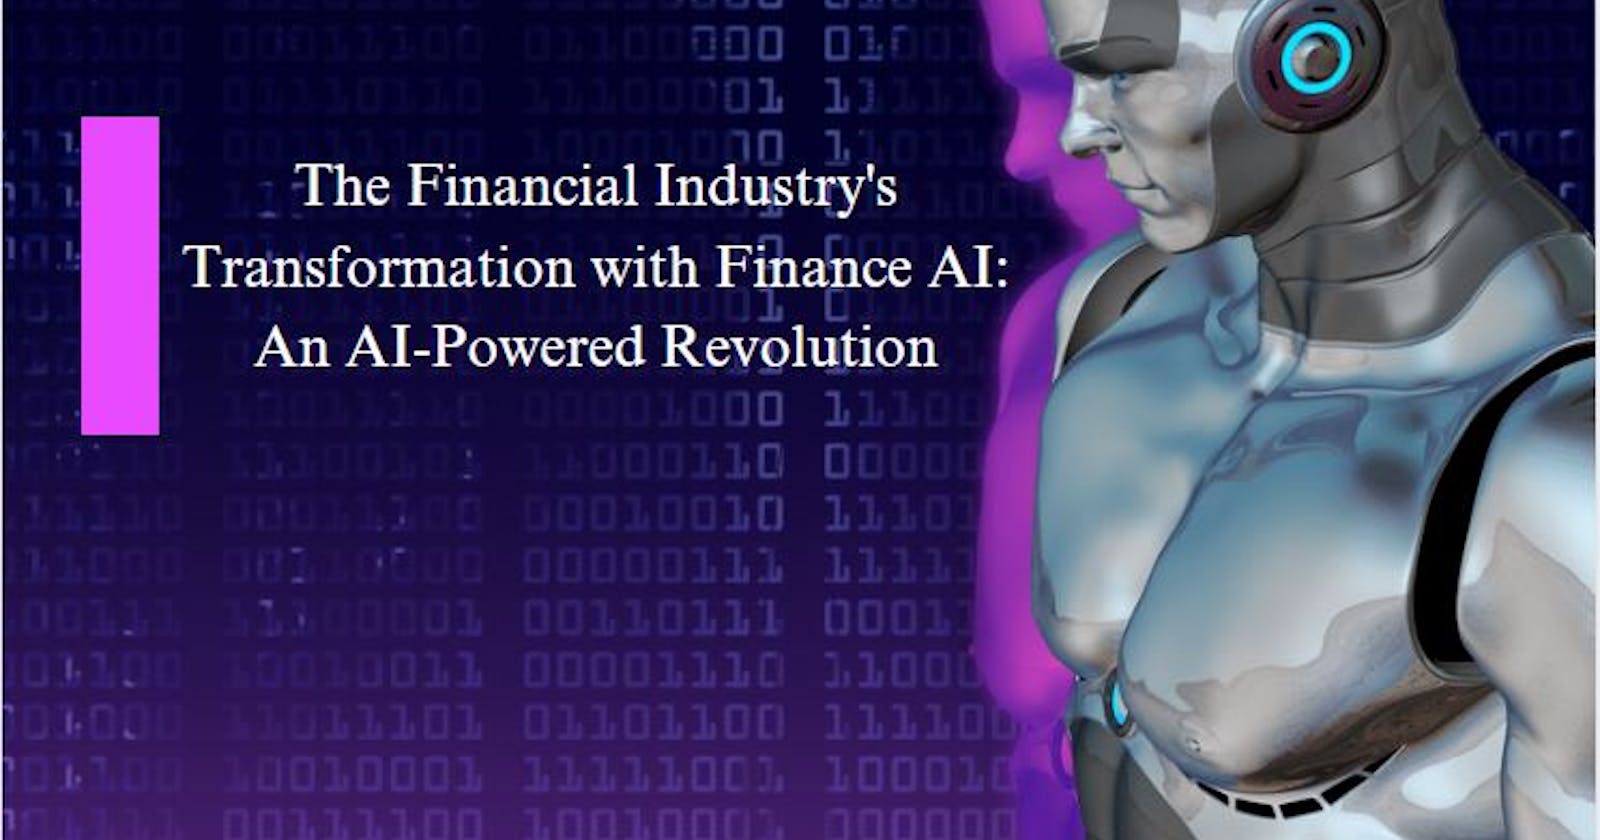 The Financial Industry's Transformation with Finance AI: An AI-Powered Revolution